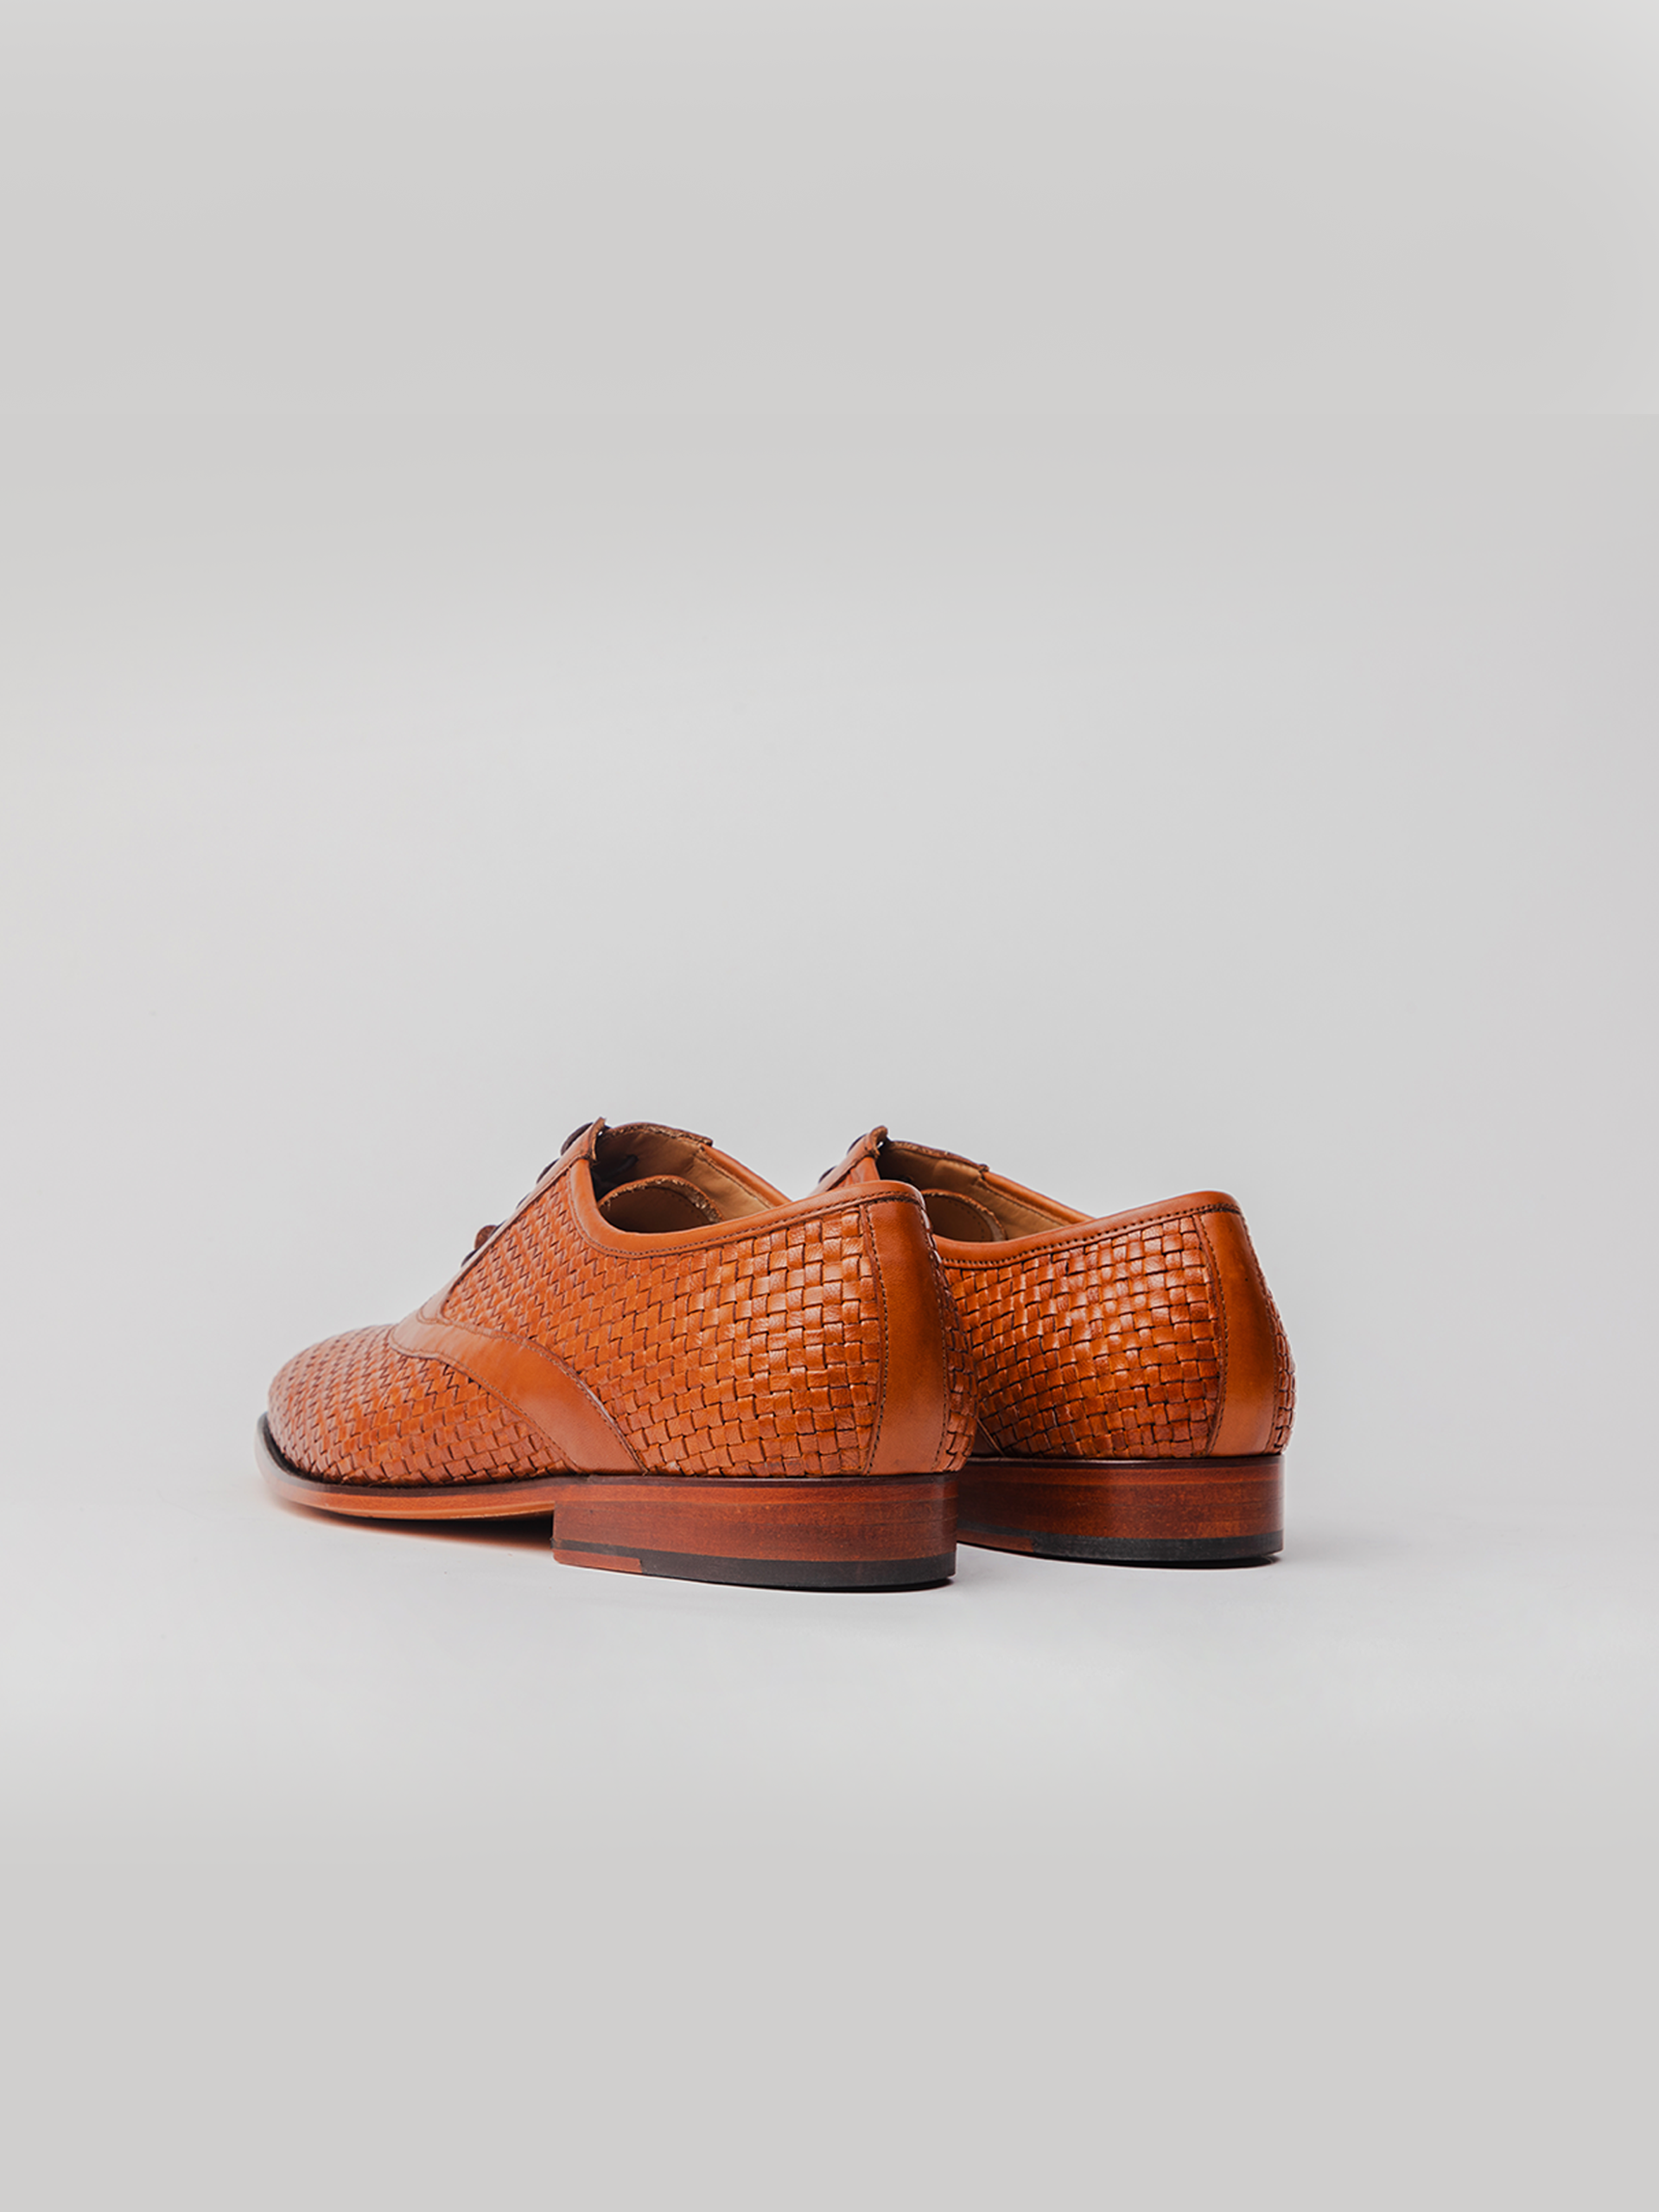 Brown Leather Braided Woven Oxford Shoes for Men